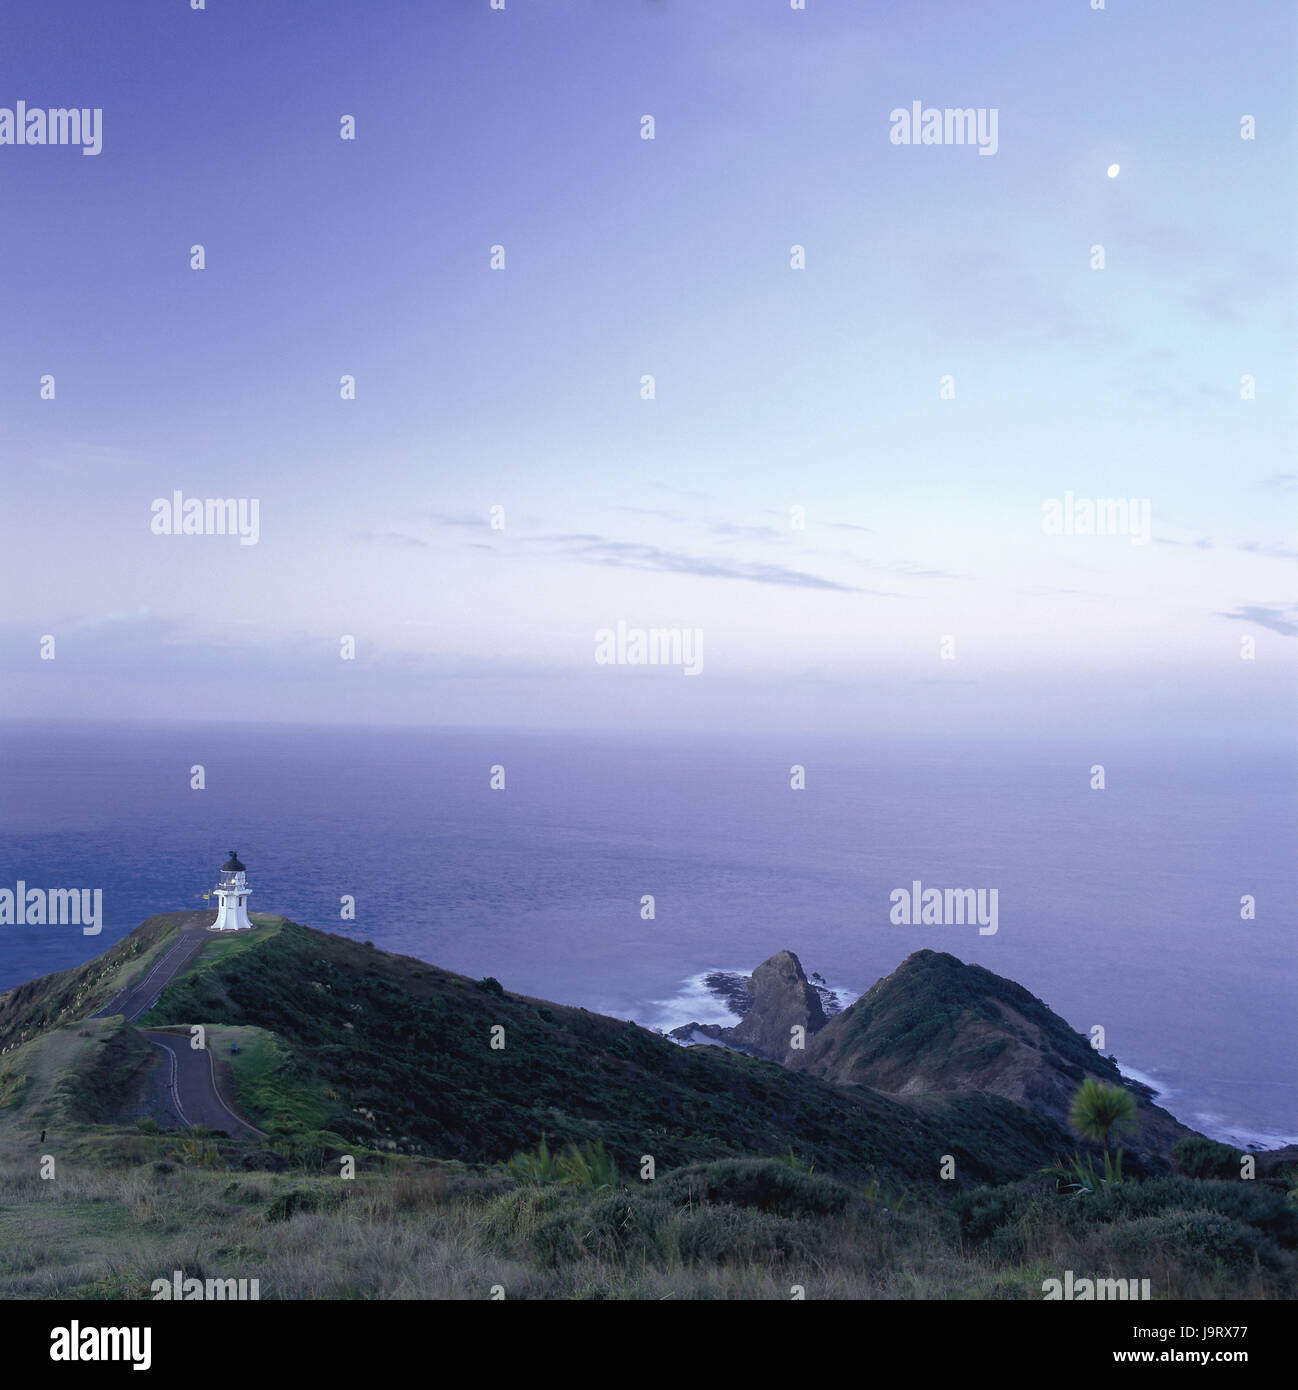 New Zealand,north island,Aupouri Peninsula,cape Reinga,coast,lighthouse,sea,dusk,Tasmanian sea,view,icon,conception,nobody,deserted,panorama,copy square,overview,distance,sky,horizon,cliffs,rocks,bile coast,coast,scenery,width,unendingly,navigation,navigation,sea,moon,water,evening tuning,evening,peacefully,blue,boundlessly,atmospheric,breathing square,time out,drawing a deep breath,security,hope,rescue,travelling,longing,steadfastness,width,way, Stock Photo